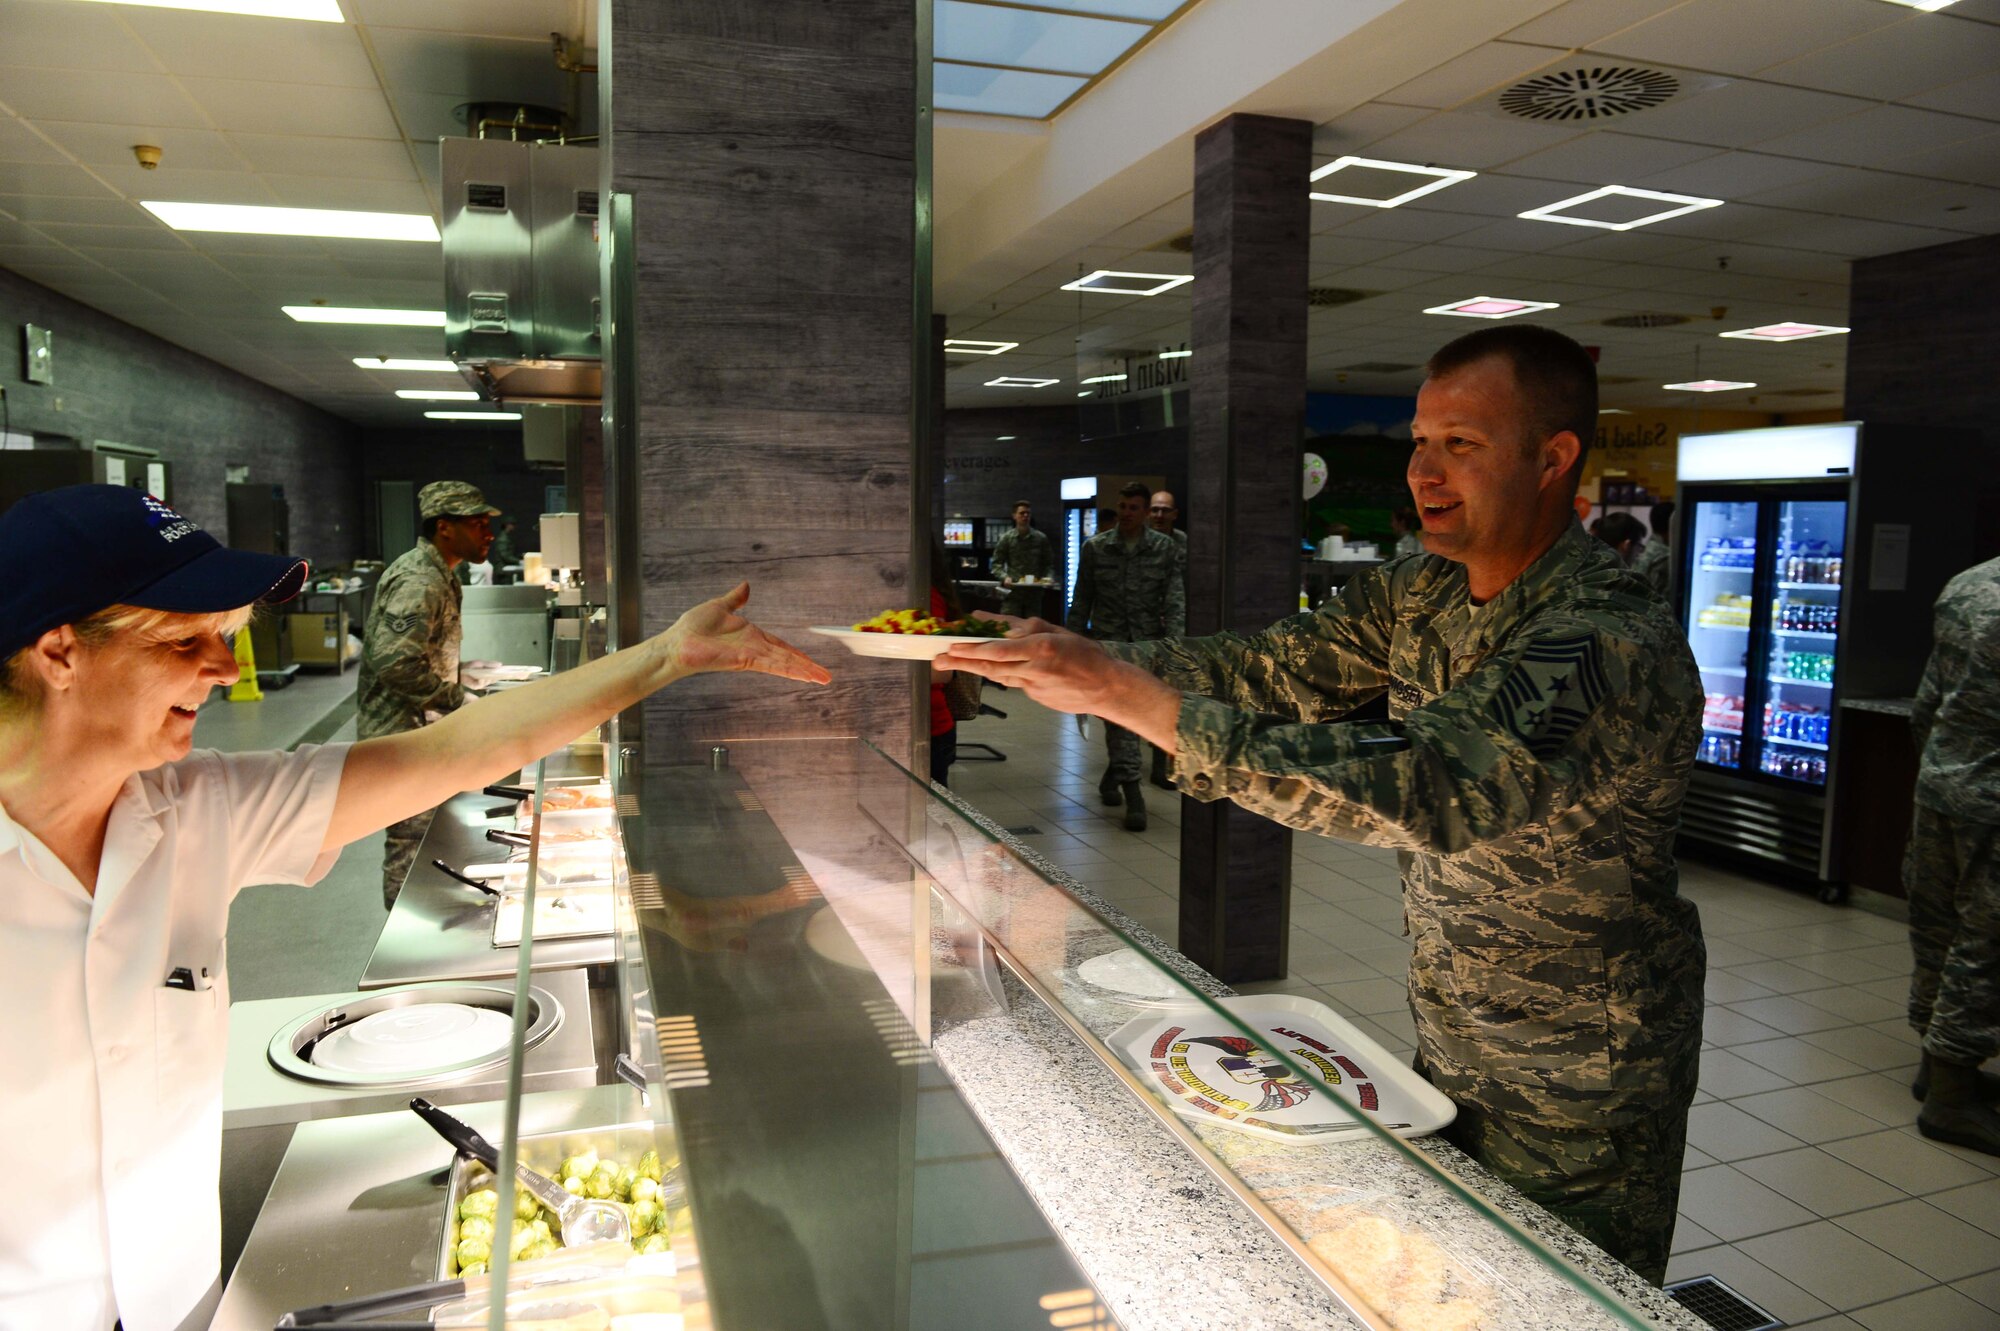 Chief Master Sgt. Edwin Ludwigsen, 52nd Fighter Wing command chief, grabs his first lunch at the updated Dining Facility at Spangdahlem Air Base after several months of renovations that made meal service unavailable to the Saber community, April 10, 2017. Upgrades to the DFAC include new kitchen equipment like ovens and a walk in fridge, air conditioning installed in the kitchen, a new service line, repainting the walls and adding murals in the dining rooms to reflect the base's connection to the local community. (U.S. Air Force photo by Senior Airman Joshua R. M. Dewberry)